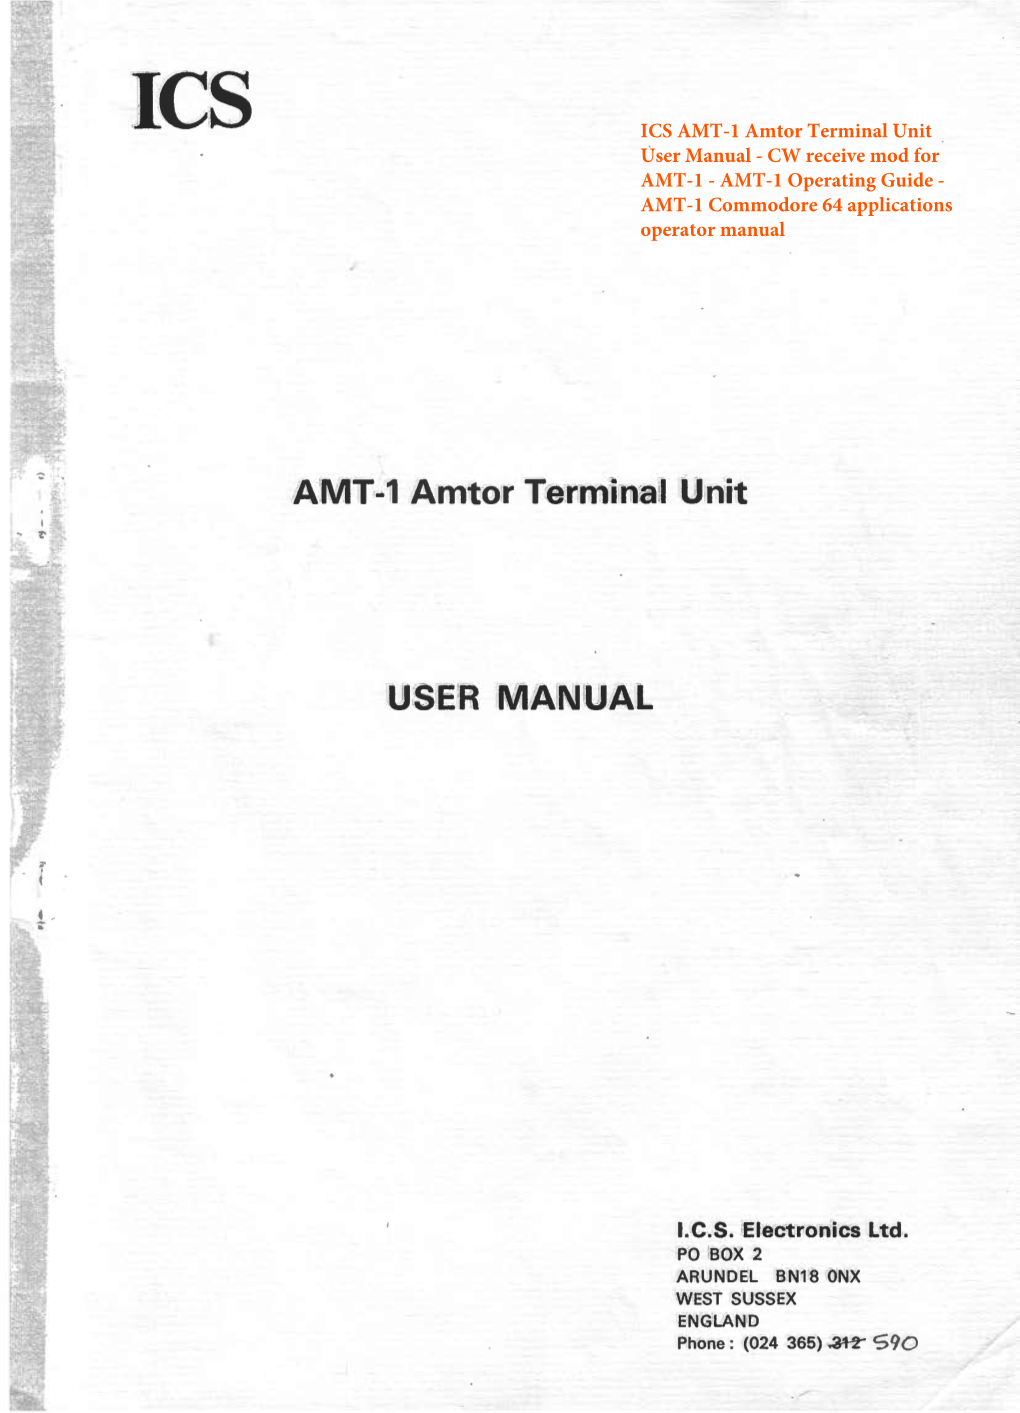 AMT-1 Amtor Terminal Unit User Manual - CW Receive Mod for AMT-1 - AMT-1 Operating Guide - AMT-1 Commodore 64 Applications Operator Manual